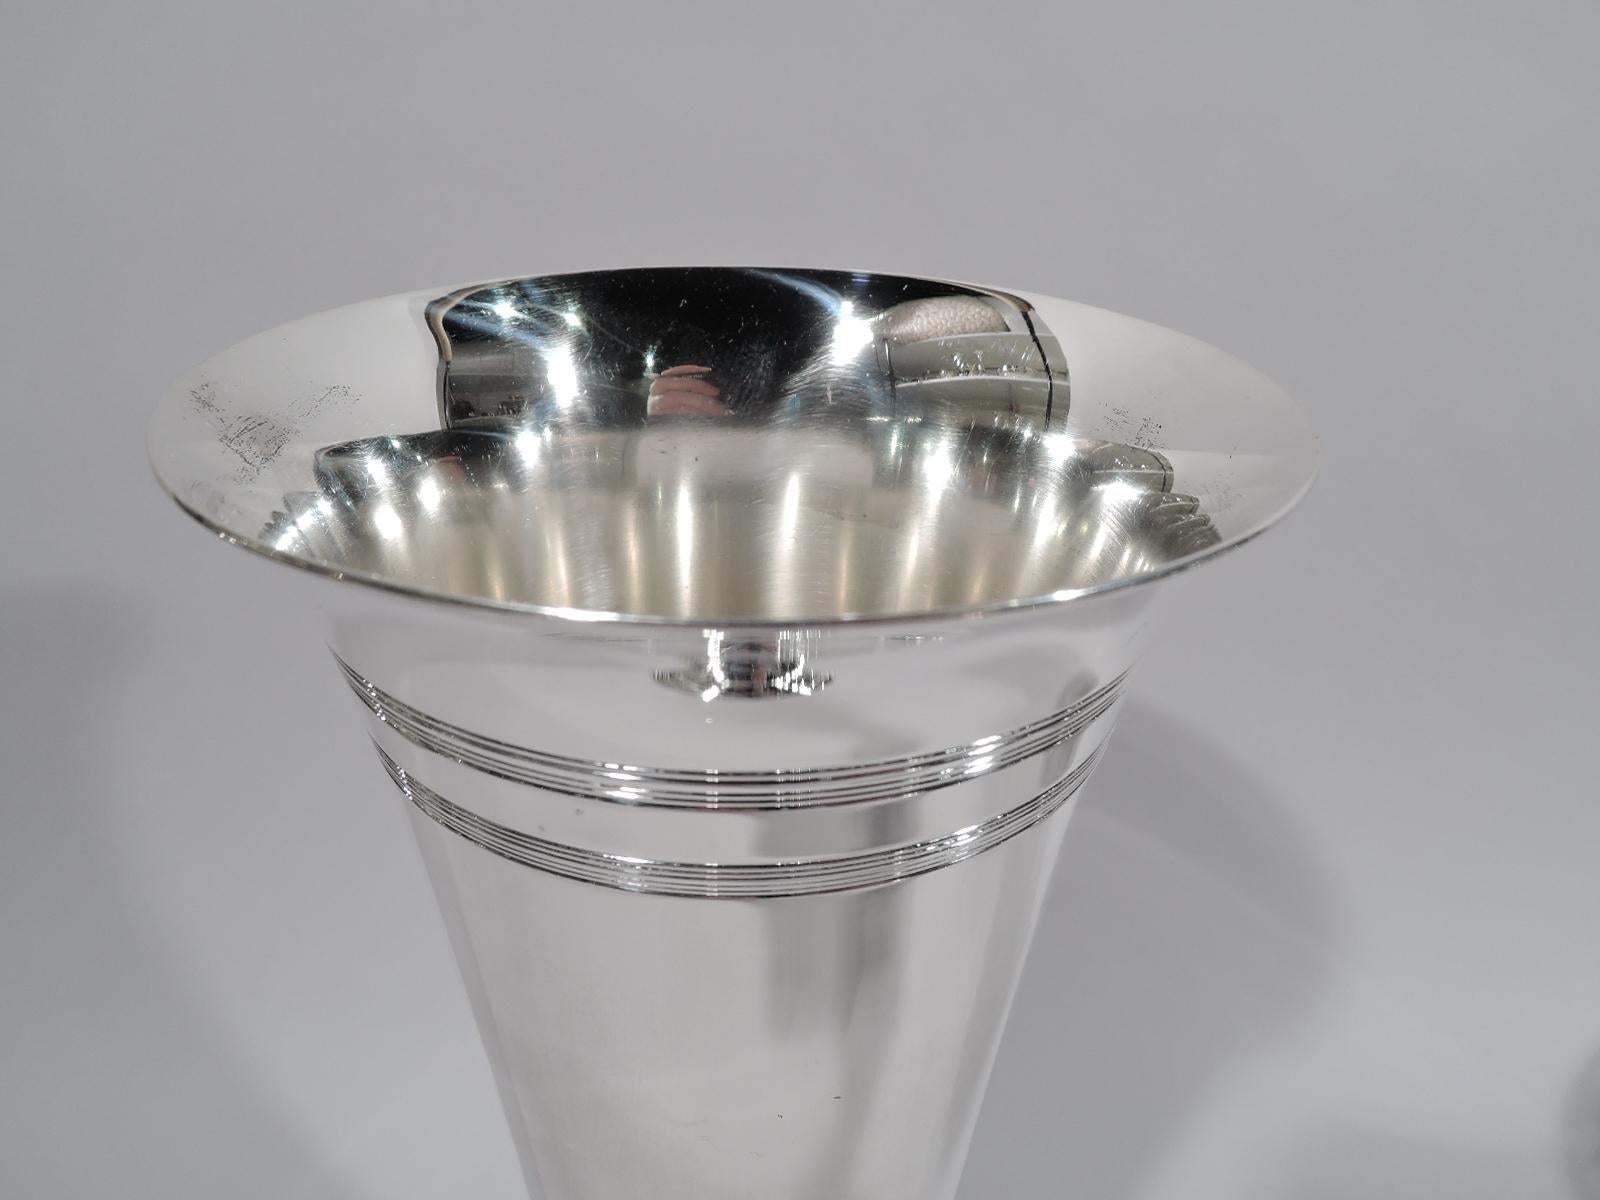 Modern sterling silver vase. Made by Tiffany & Co. in New York, circa 1910. Conical with flared rim, short upward tapering, and round stepped foot. Engraved reeded bands at top and foot. Fully marked including pattern no. 17040 and director’s letter